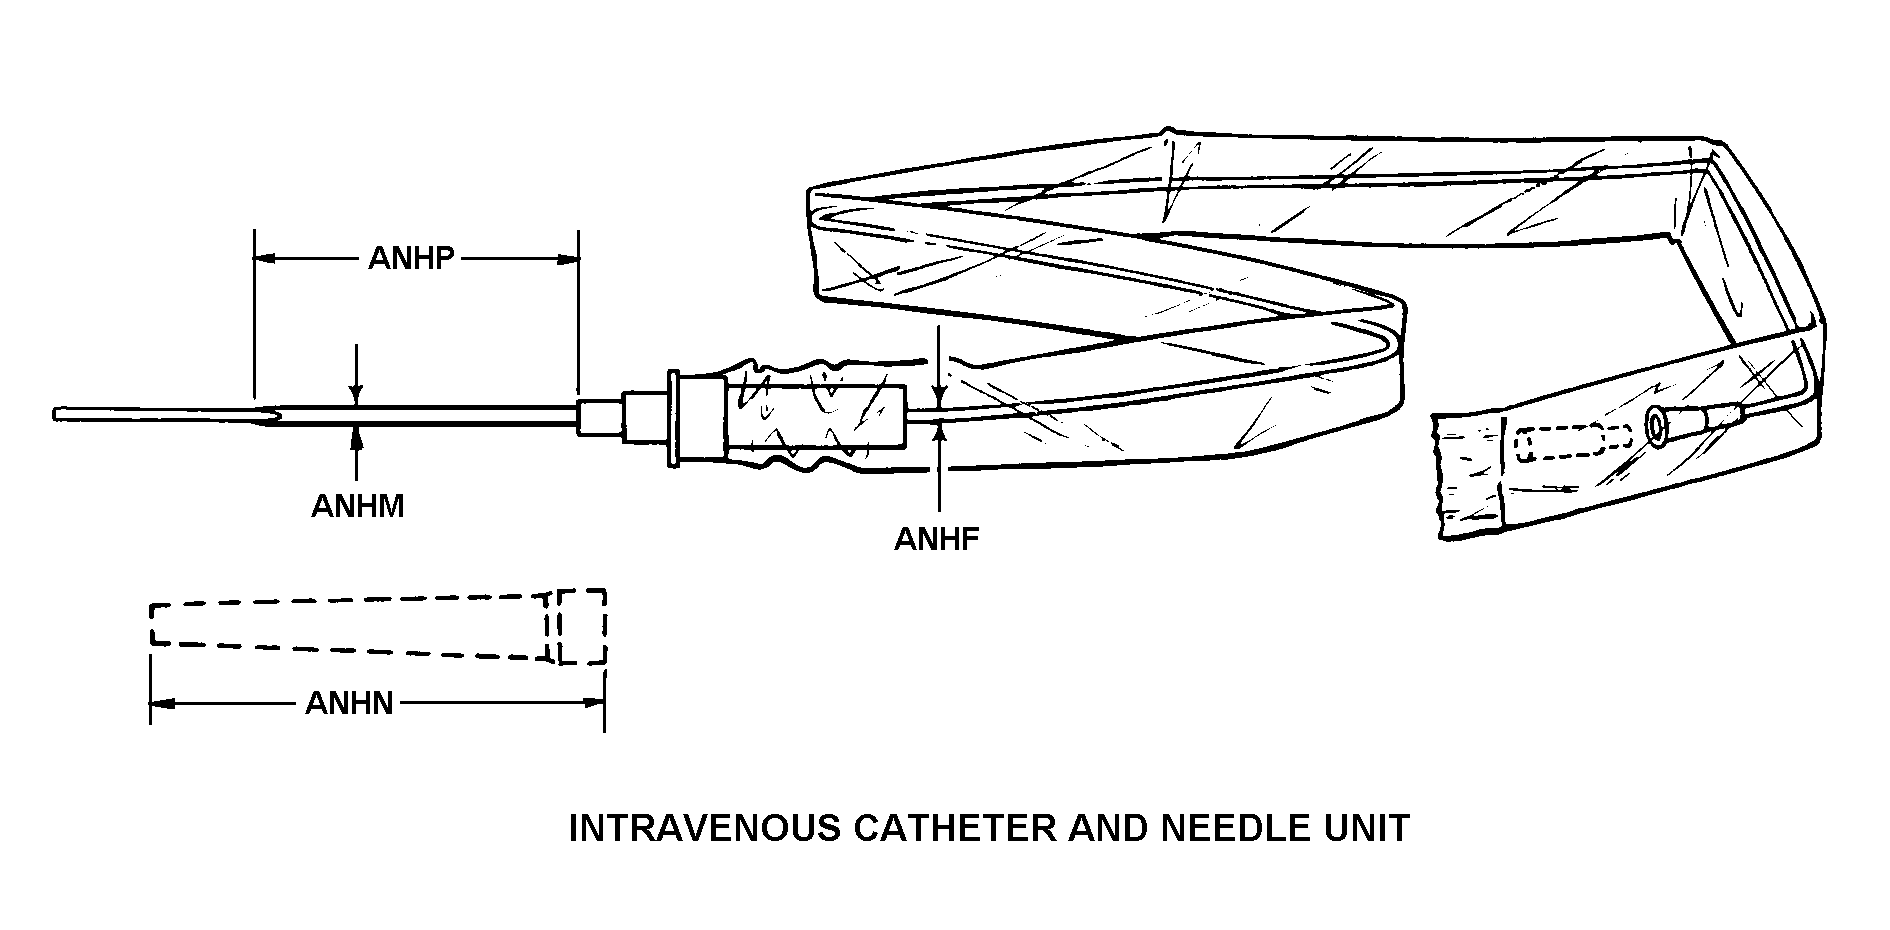 INTRAVENOUS CATHETER AND NEEDLE UNIT style nsn 6515-01-221-8990